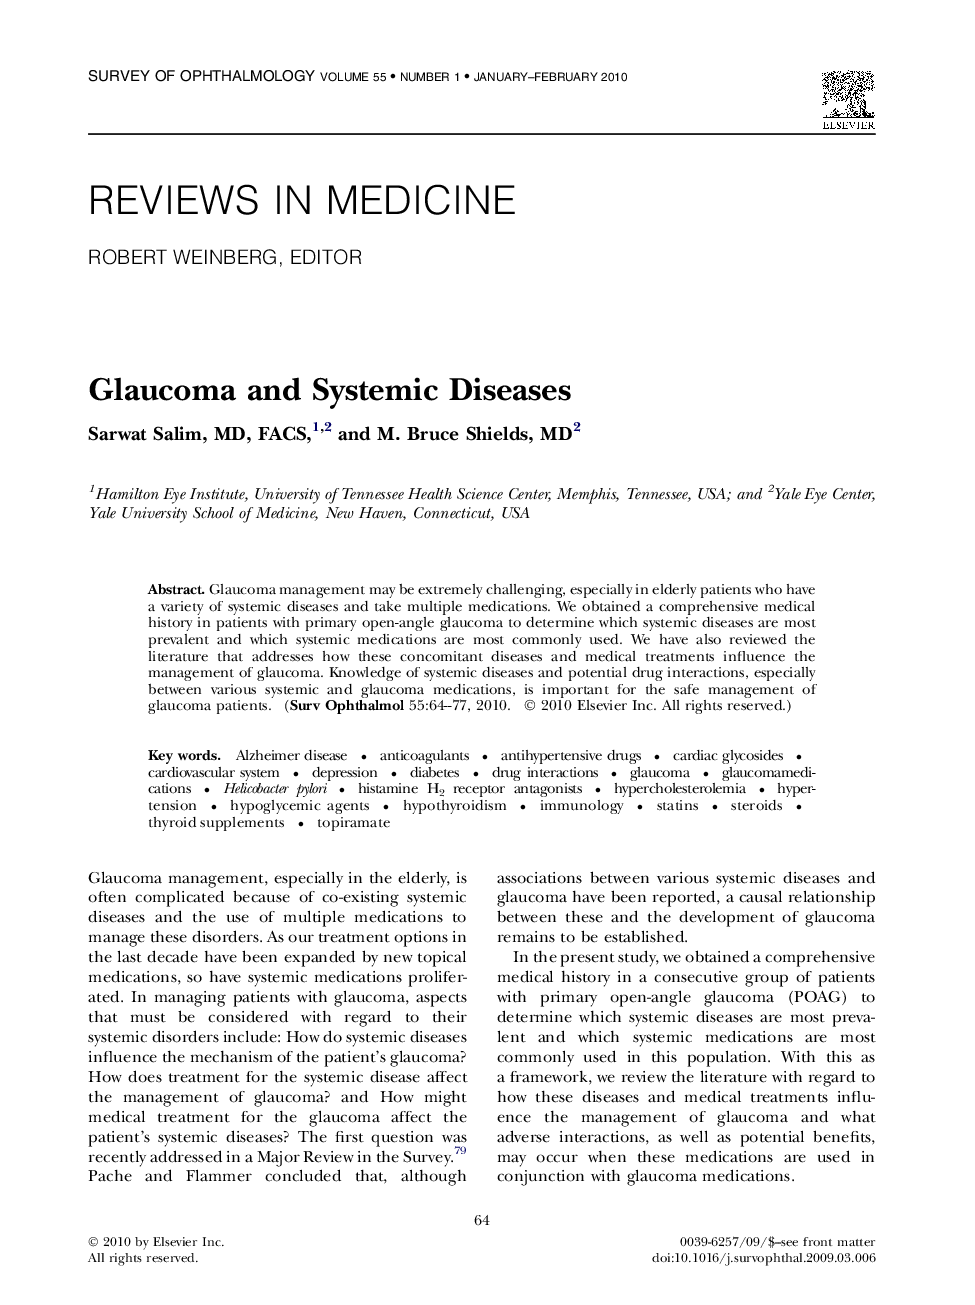 Glaucoma and Systemic Diseases 